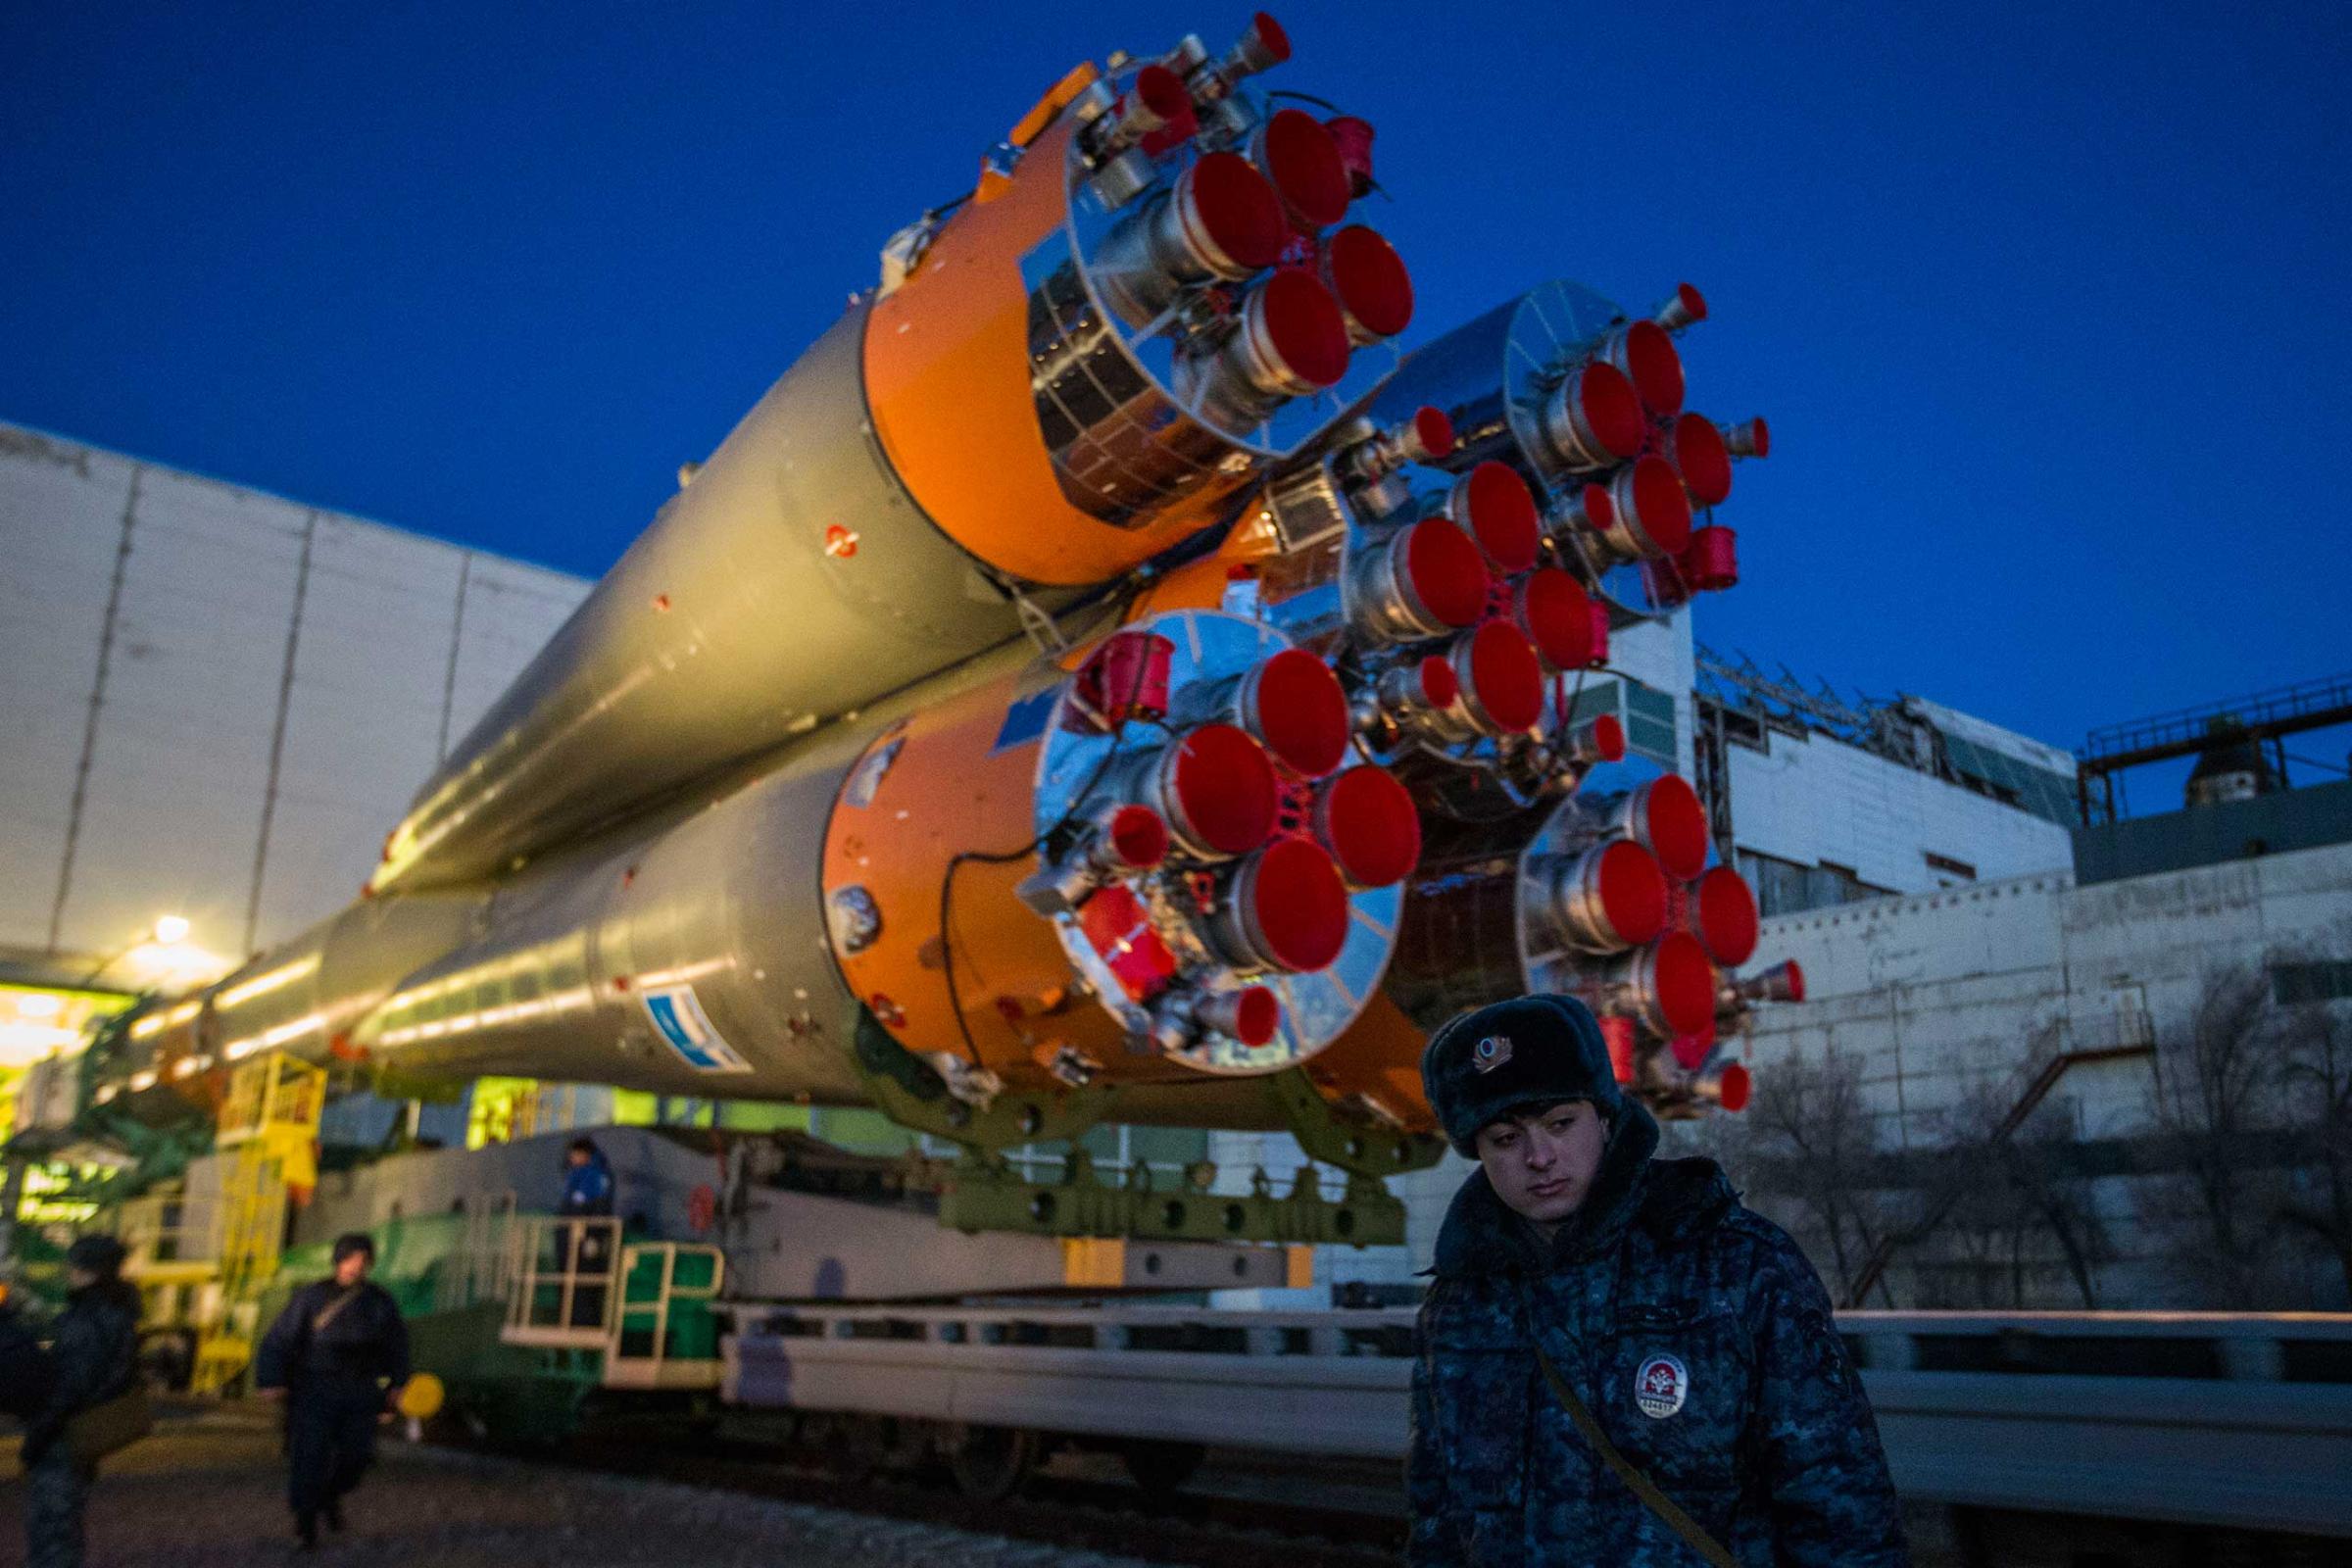 A member of the Russian guard stands in front of the Soyuz as it is rolled out for launch at the Baikonur Cosmodrome in Kazakhstan on Wednesday, March 25.